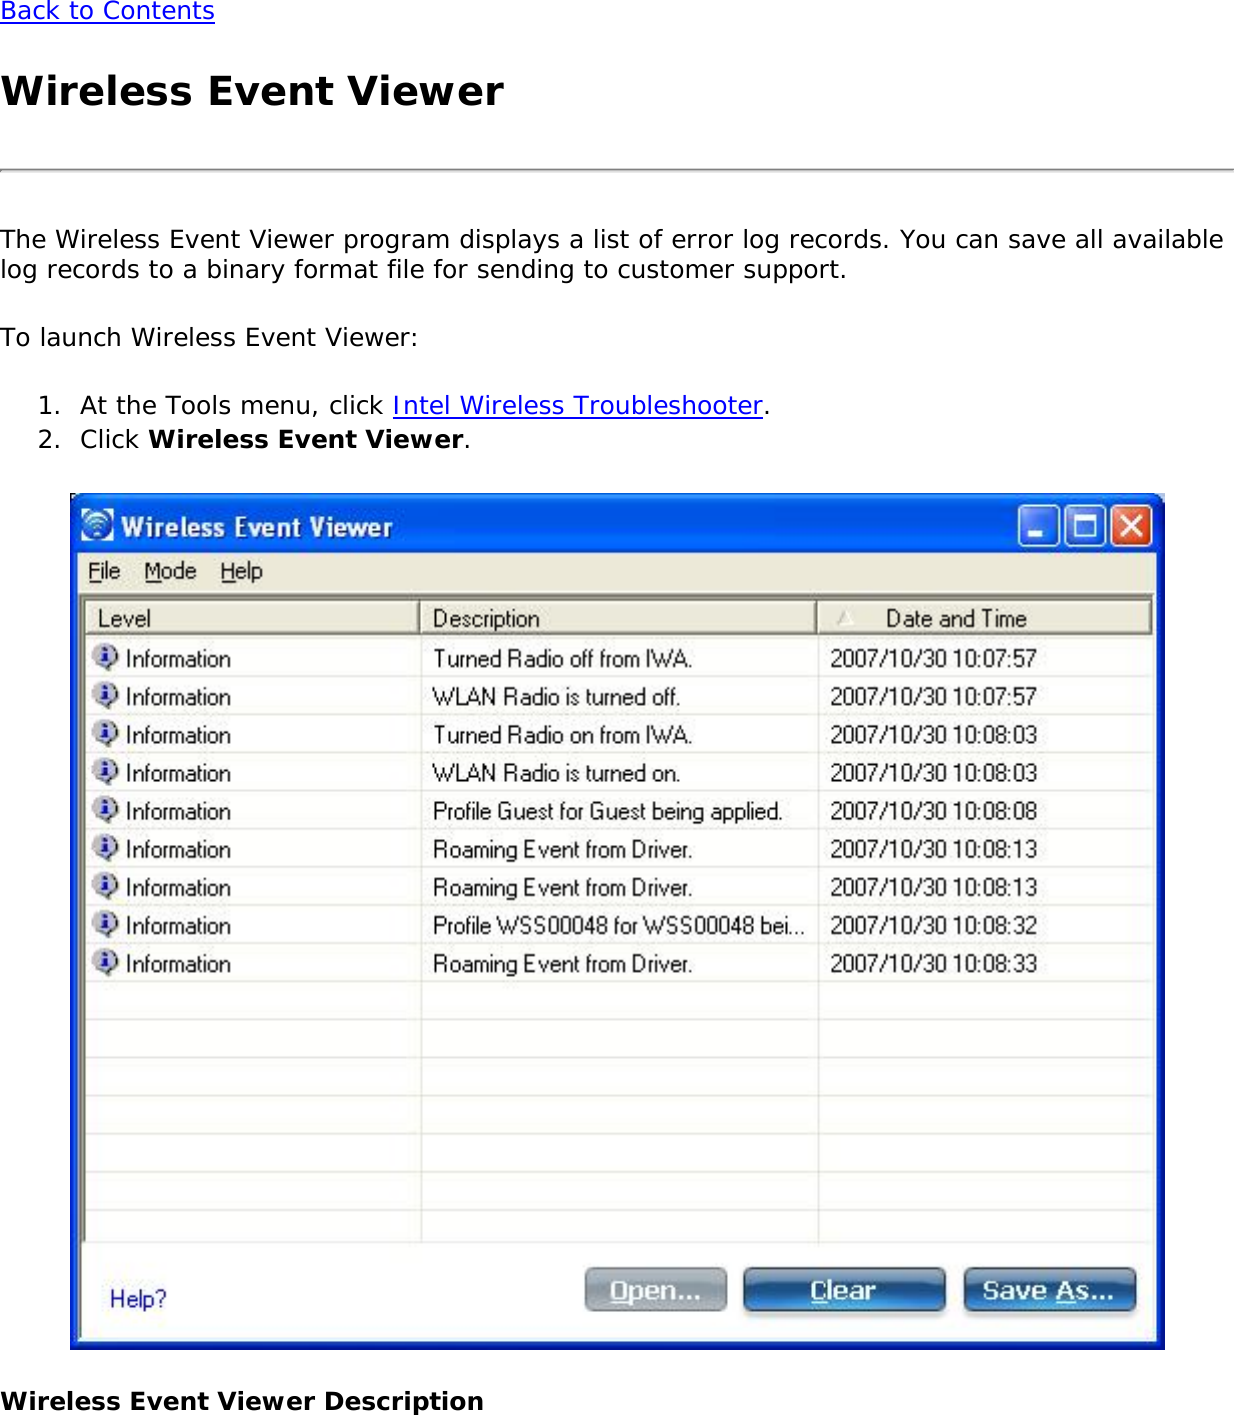 Back to ContentsWireless Event ViewerThe Wireless Event Viewer program displays a list of error log records. You can save all available log records to a binary format file for sending to customer support. To launch Wireless Event Viewer:1.  At the Tools menu, click Intel Wireless Troubleshooter. 2.  Click Wireless Event Viewer.Wireless Event Viewer Description